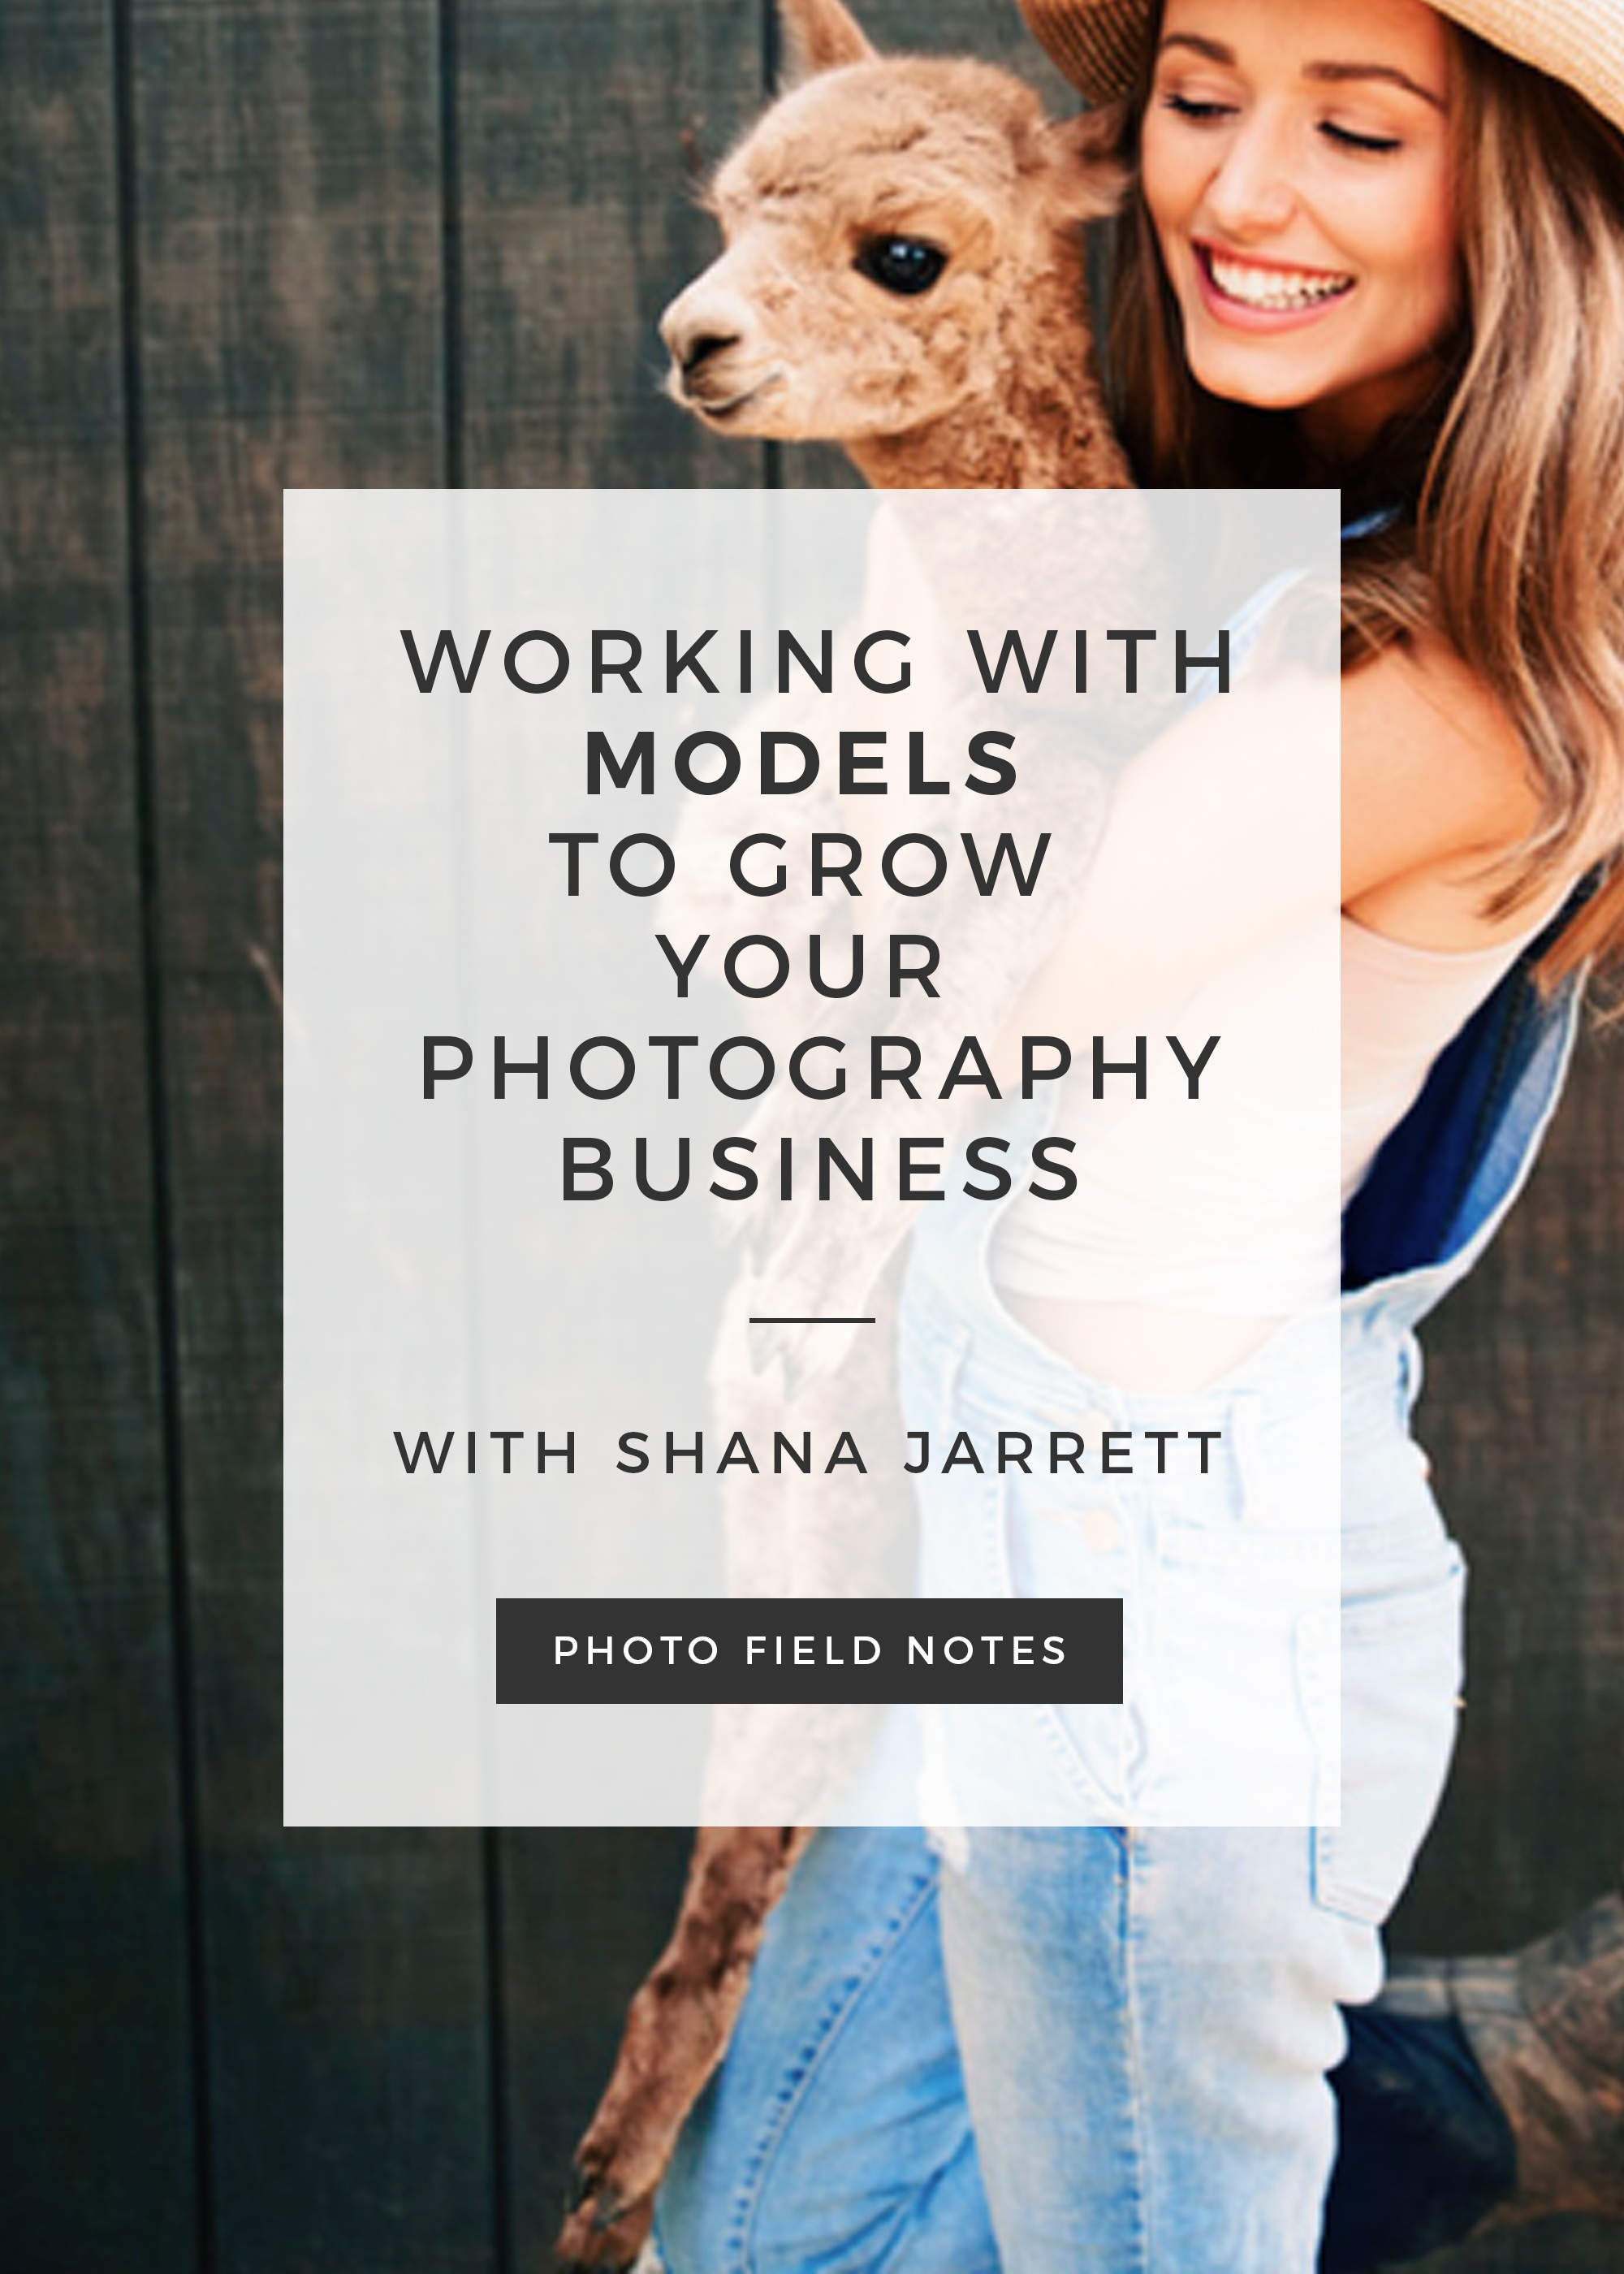 How to work with models to grow your photography business